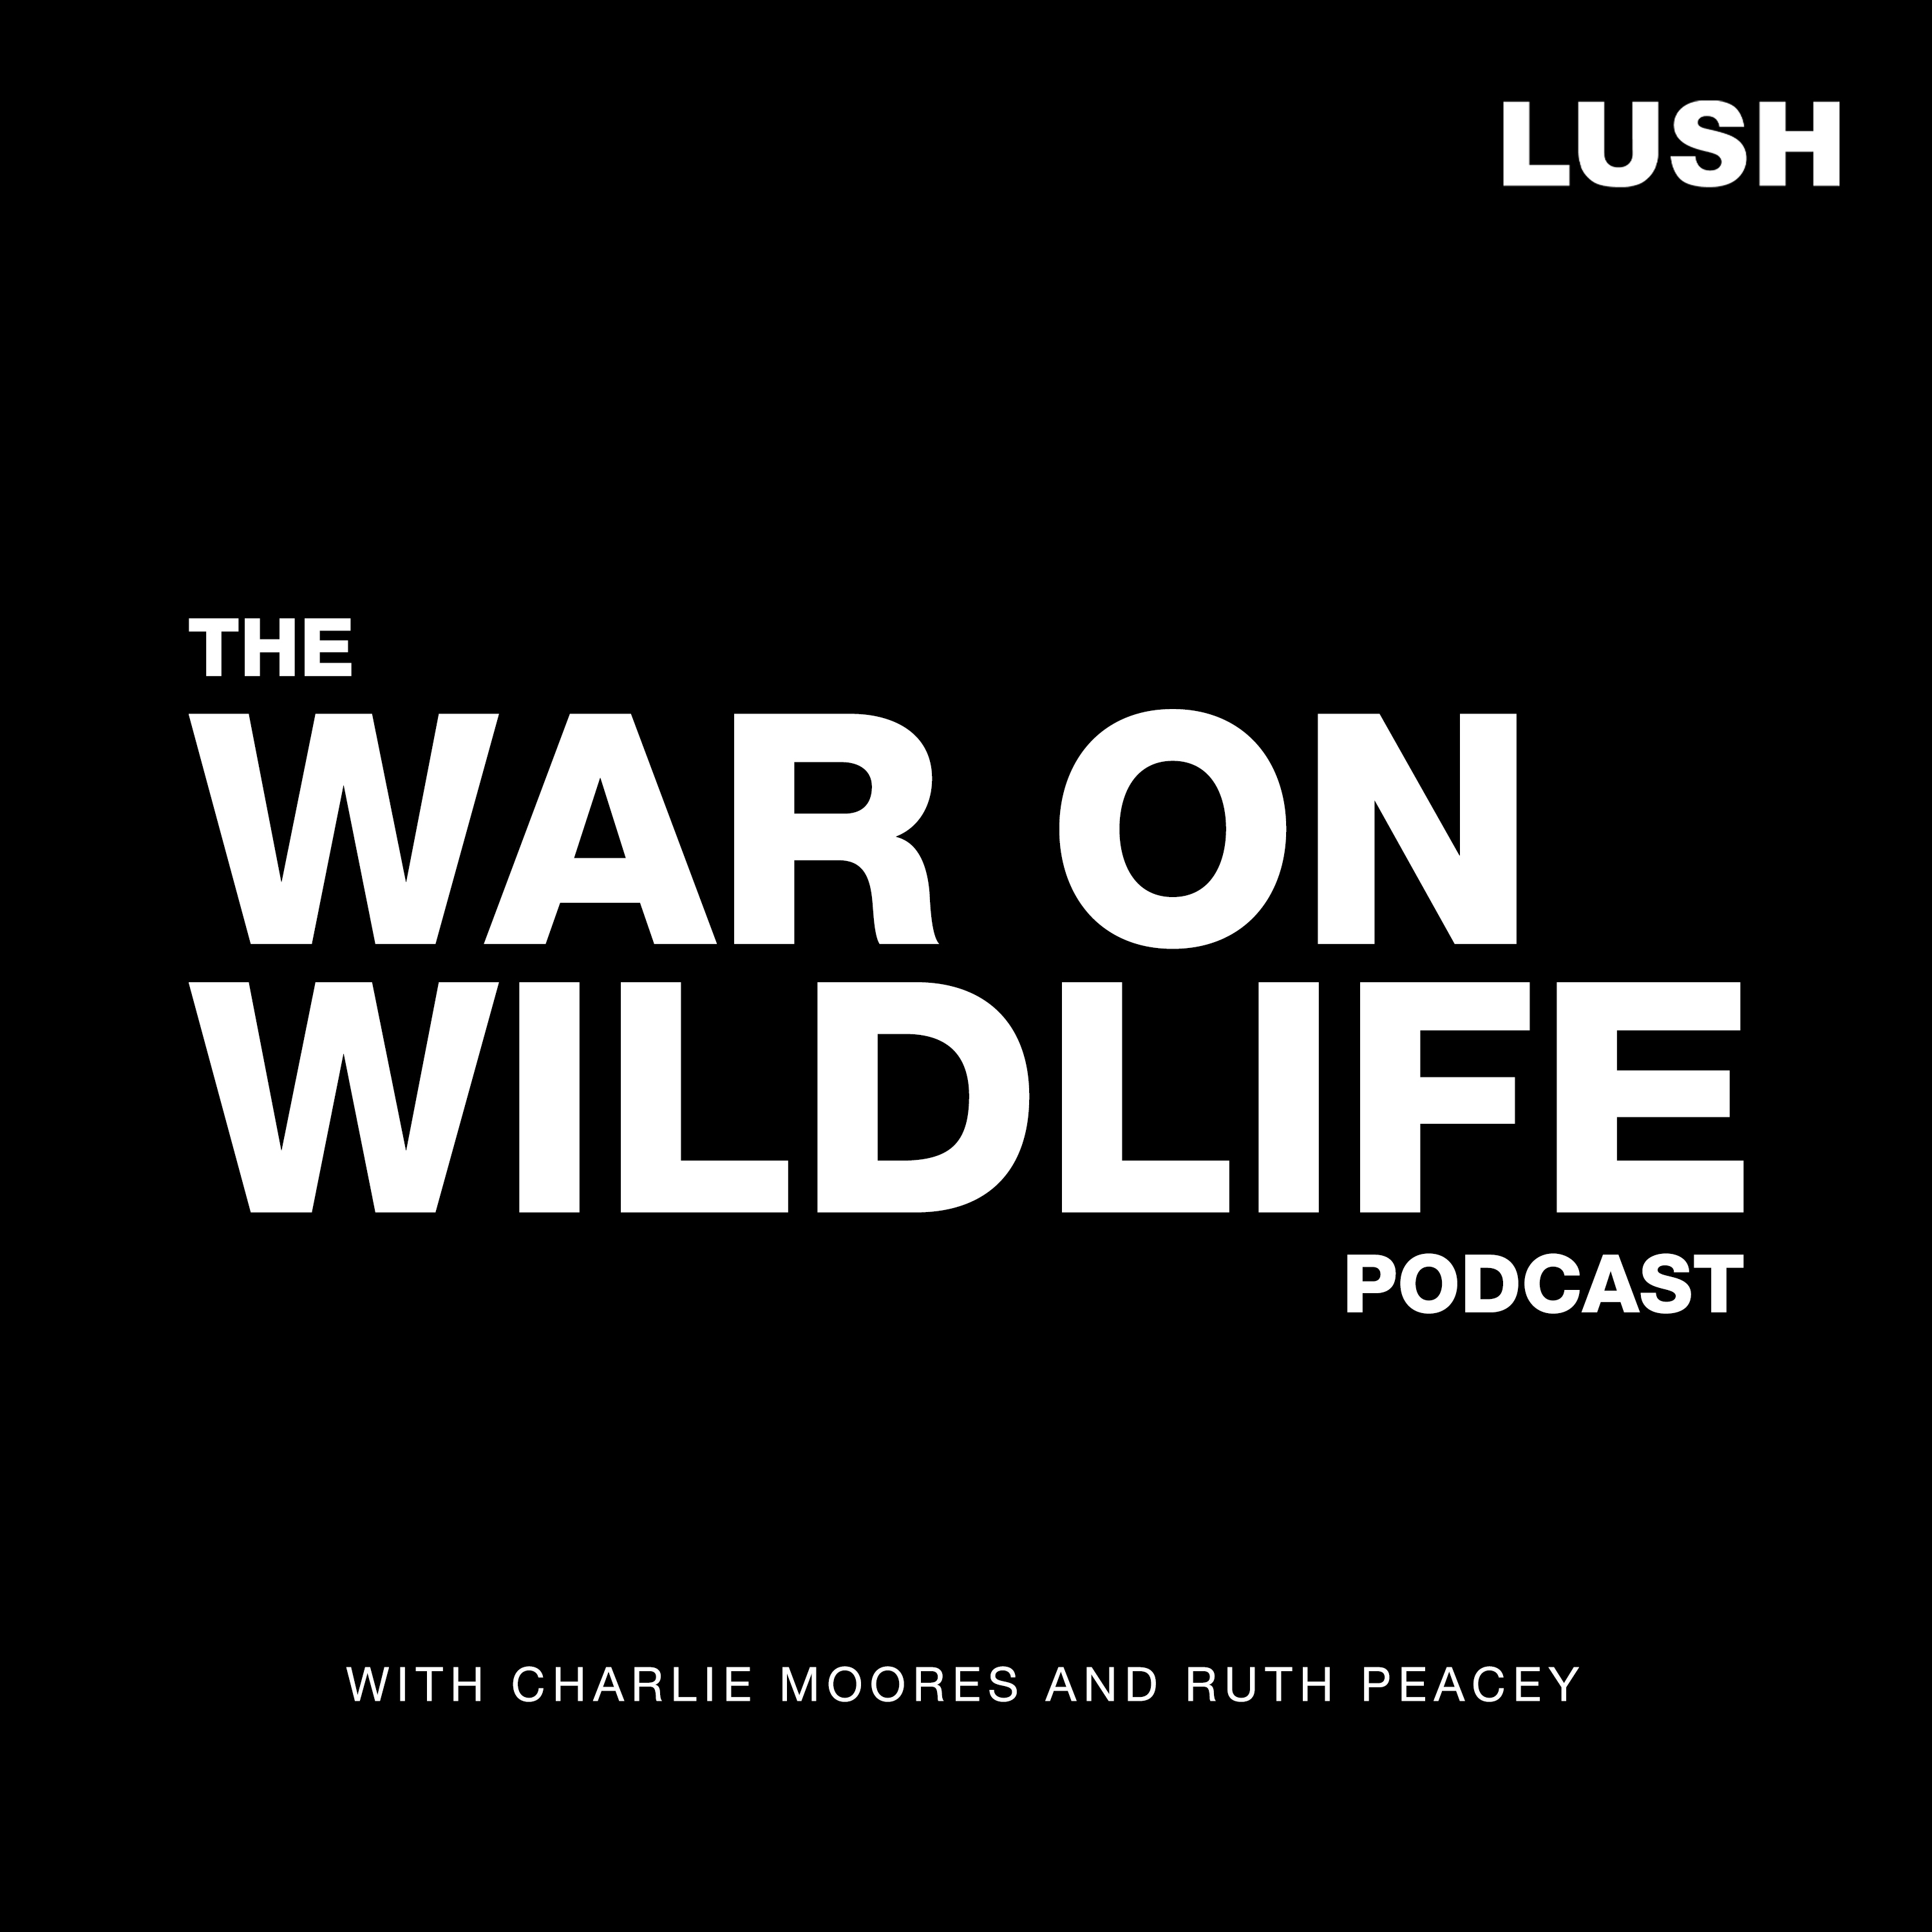 The War on Wildlife Podcast